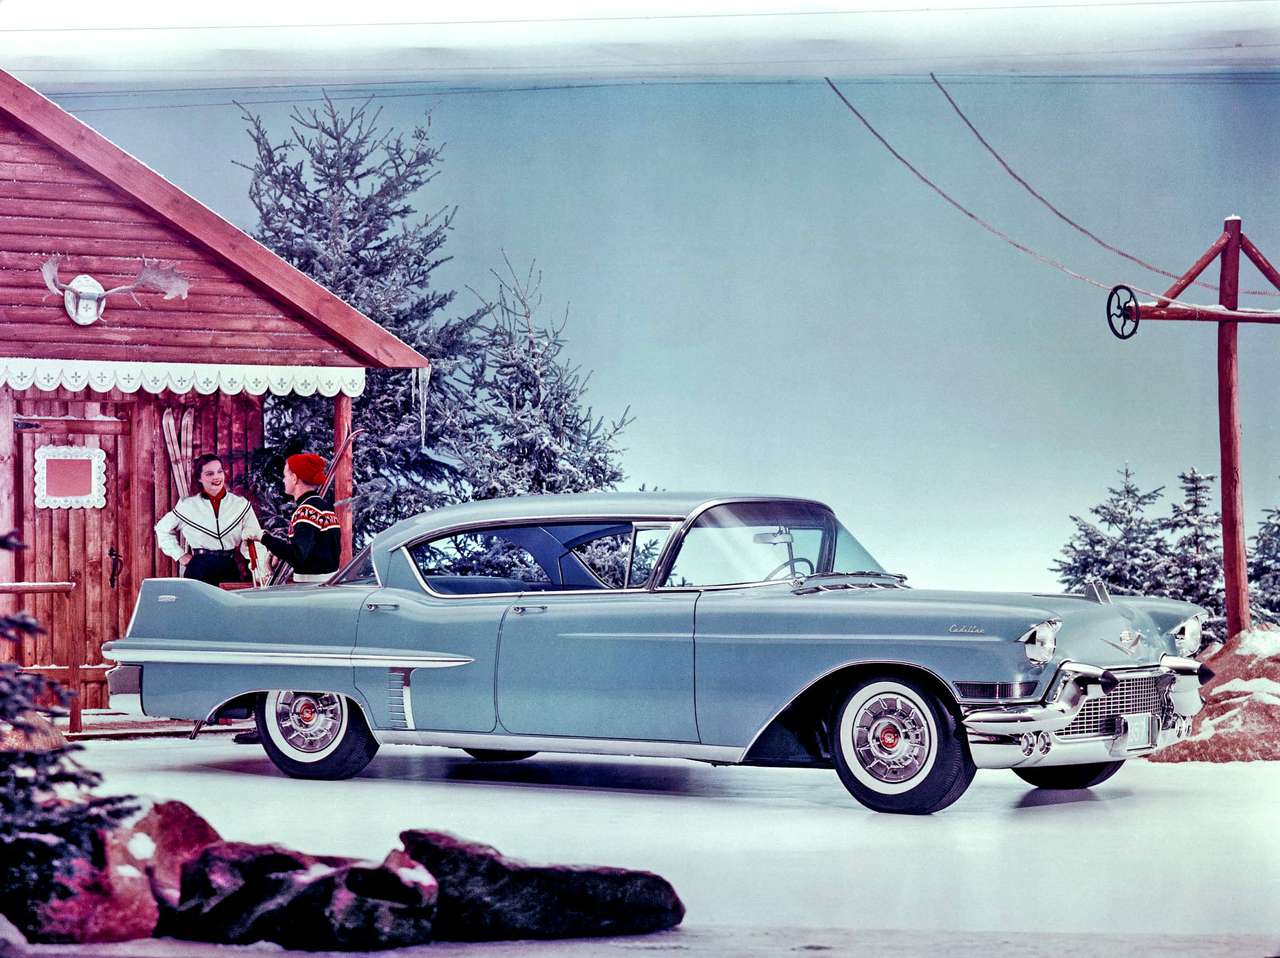 1957 Cadillac Sixty-Two hardtop jigsaw puzzle online